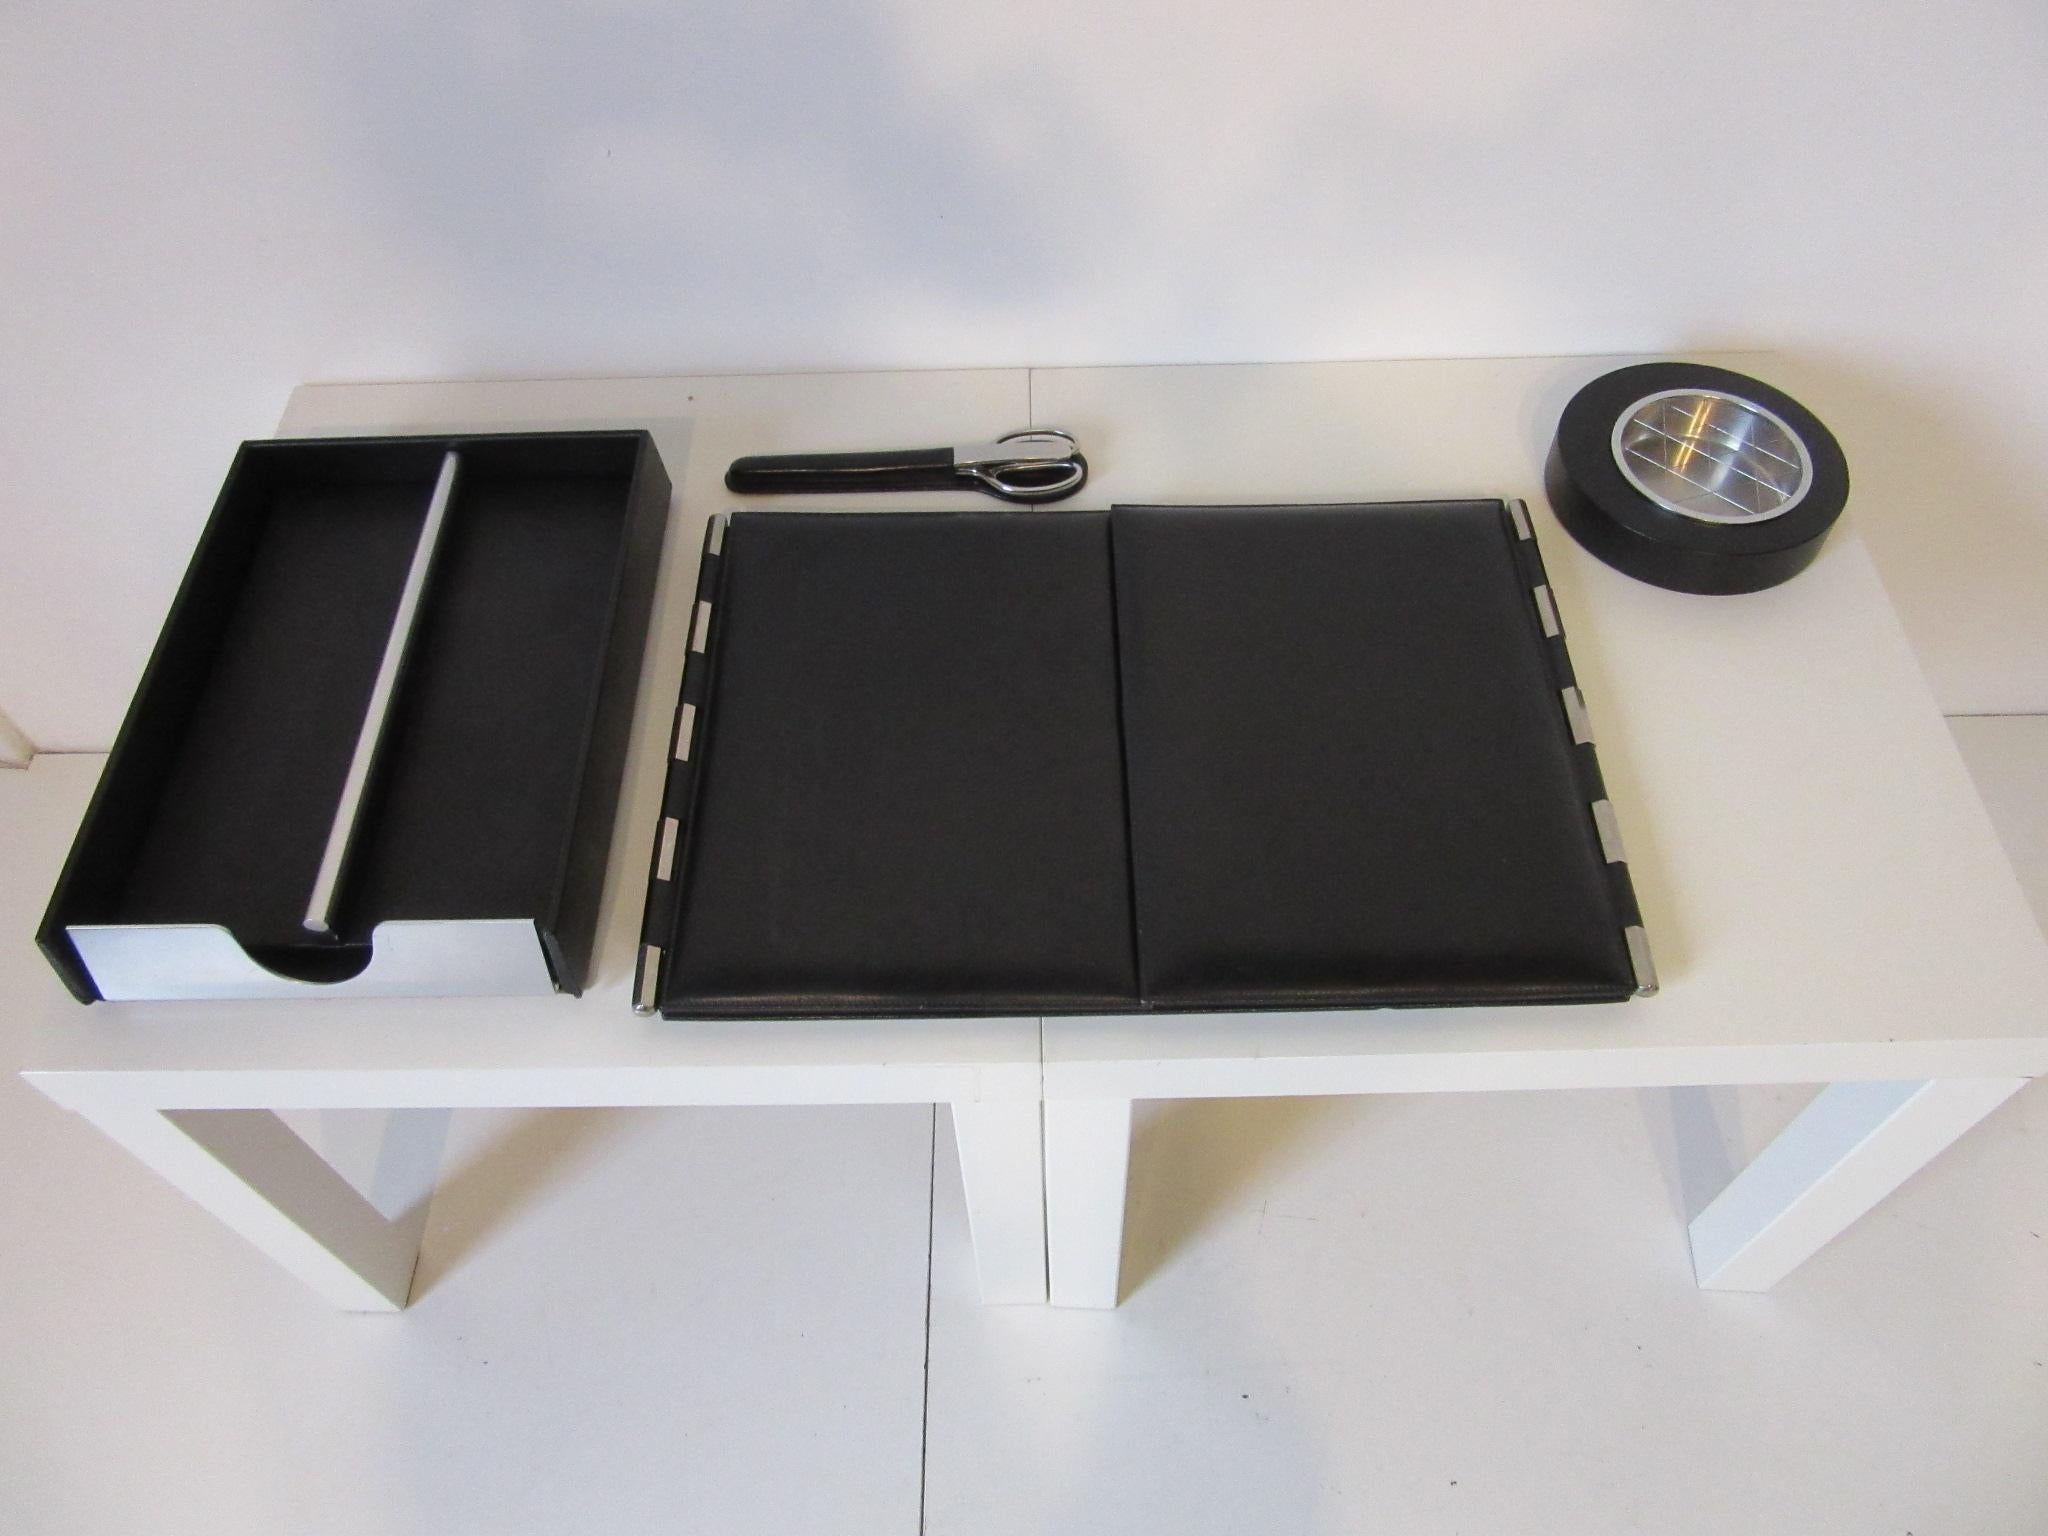 A matching four piece high quality black leather desk set containing large opening desk pad, leather wrapped ashtray, scissors, letter opener with holder and a file tray with lid. Used in a up coming movie with Anne Hathaway, Mark Ruffalo and Tim